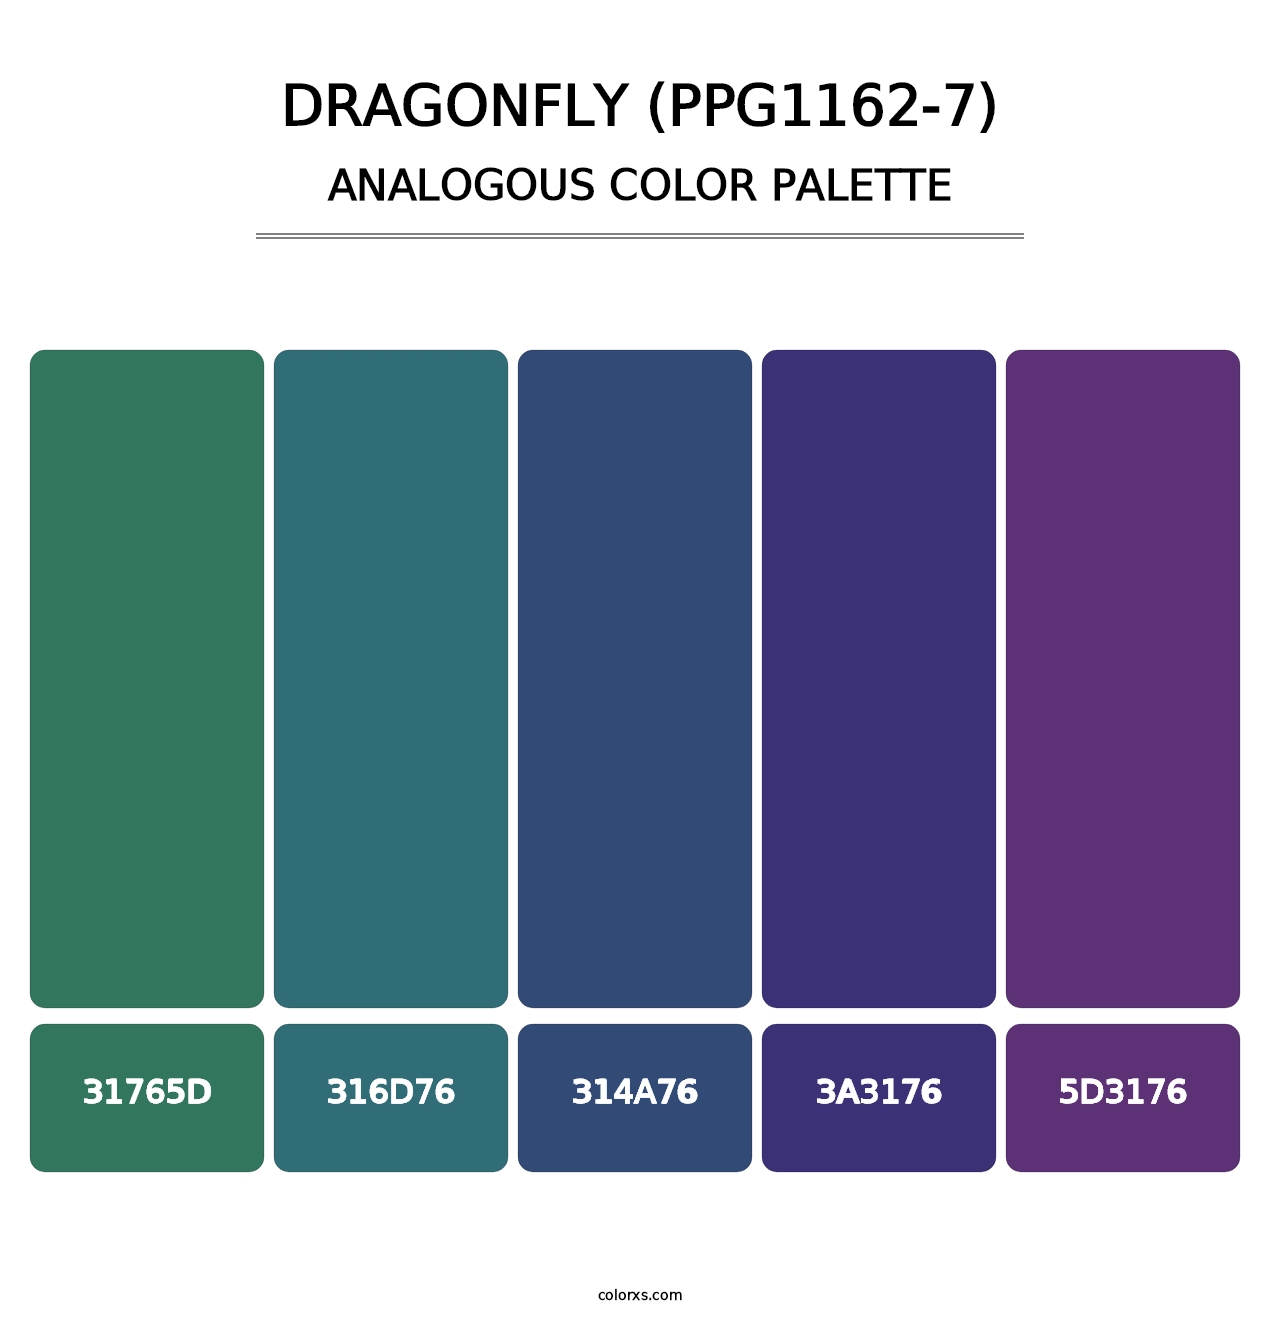 Dragonfly (PPG1162-7) - Analogous Color Palette